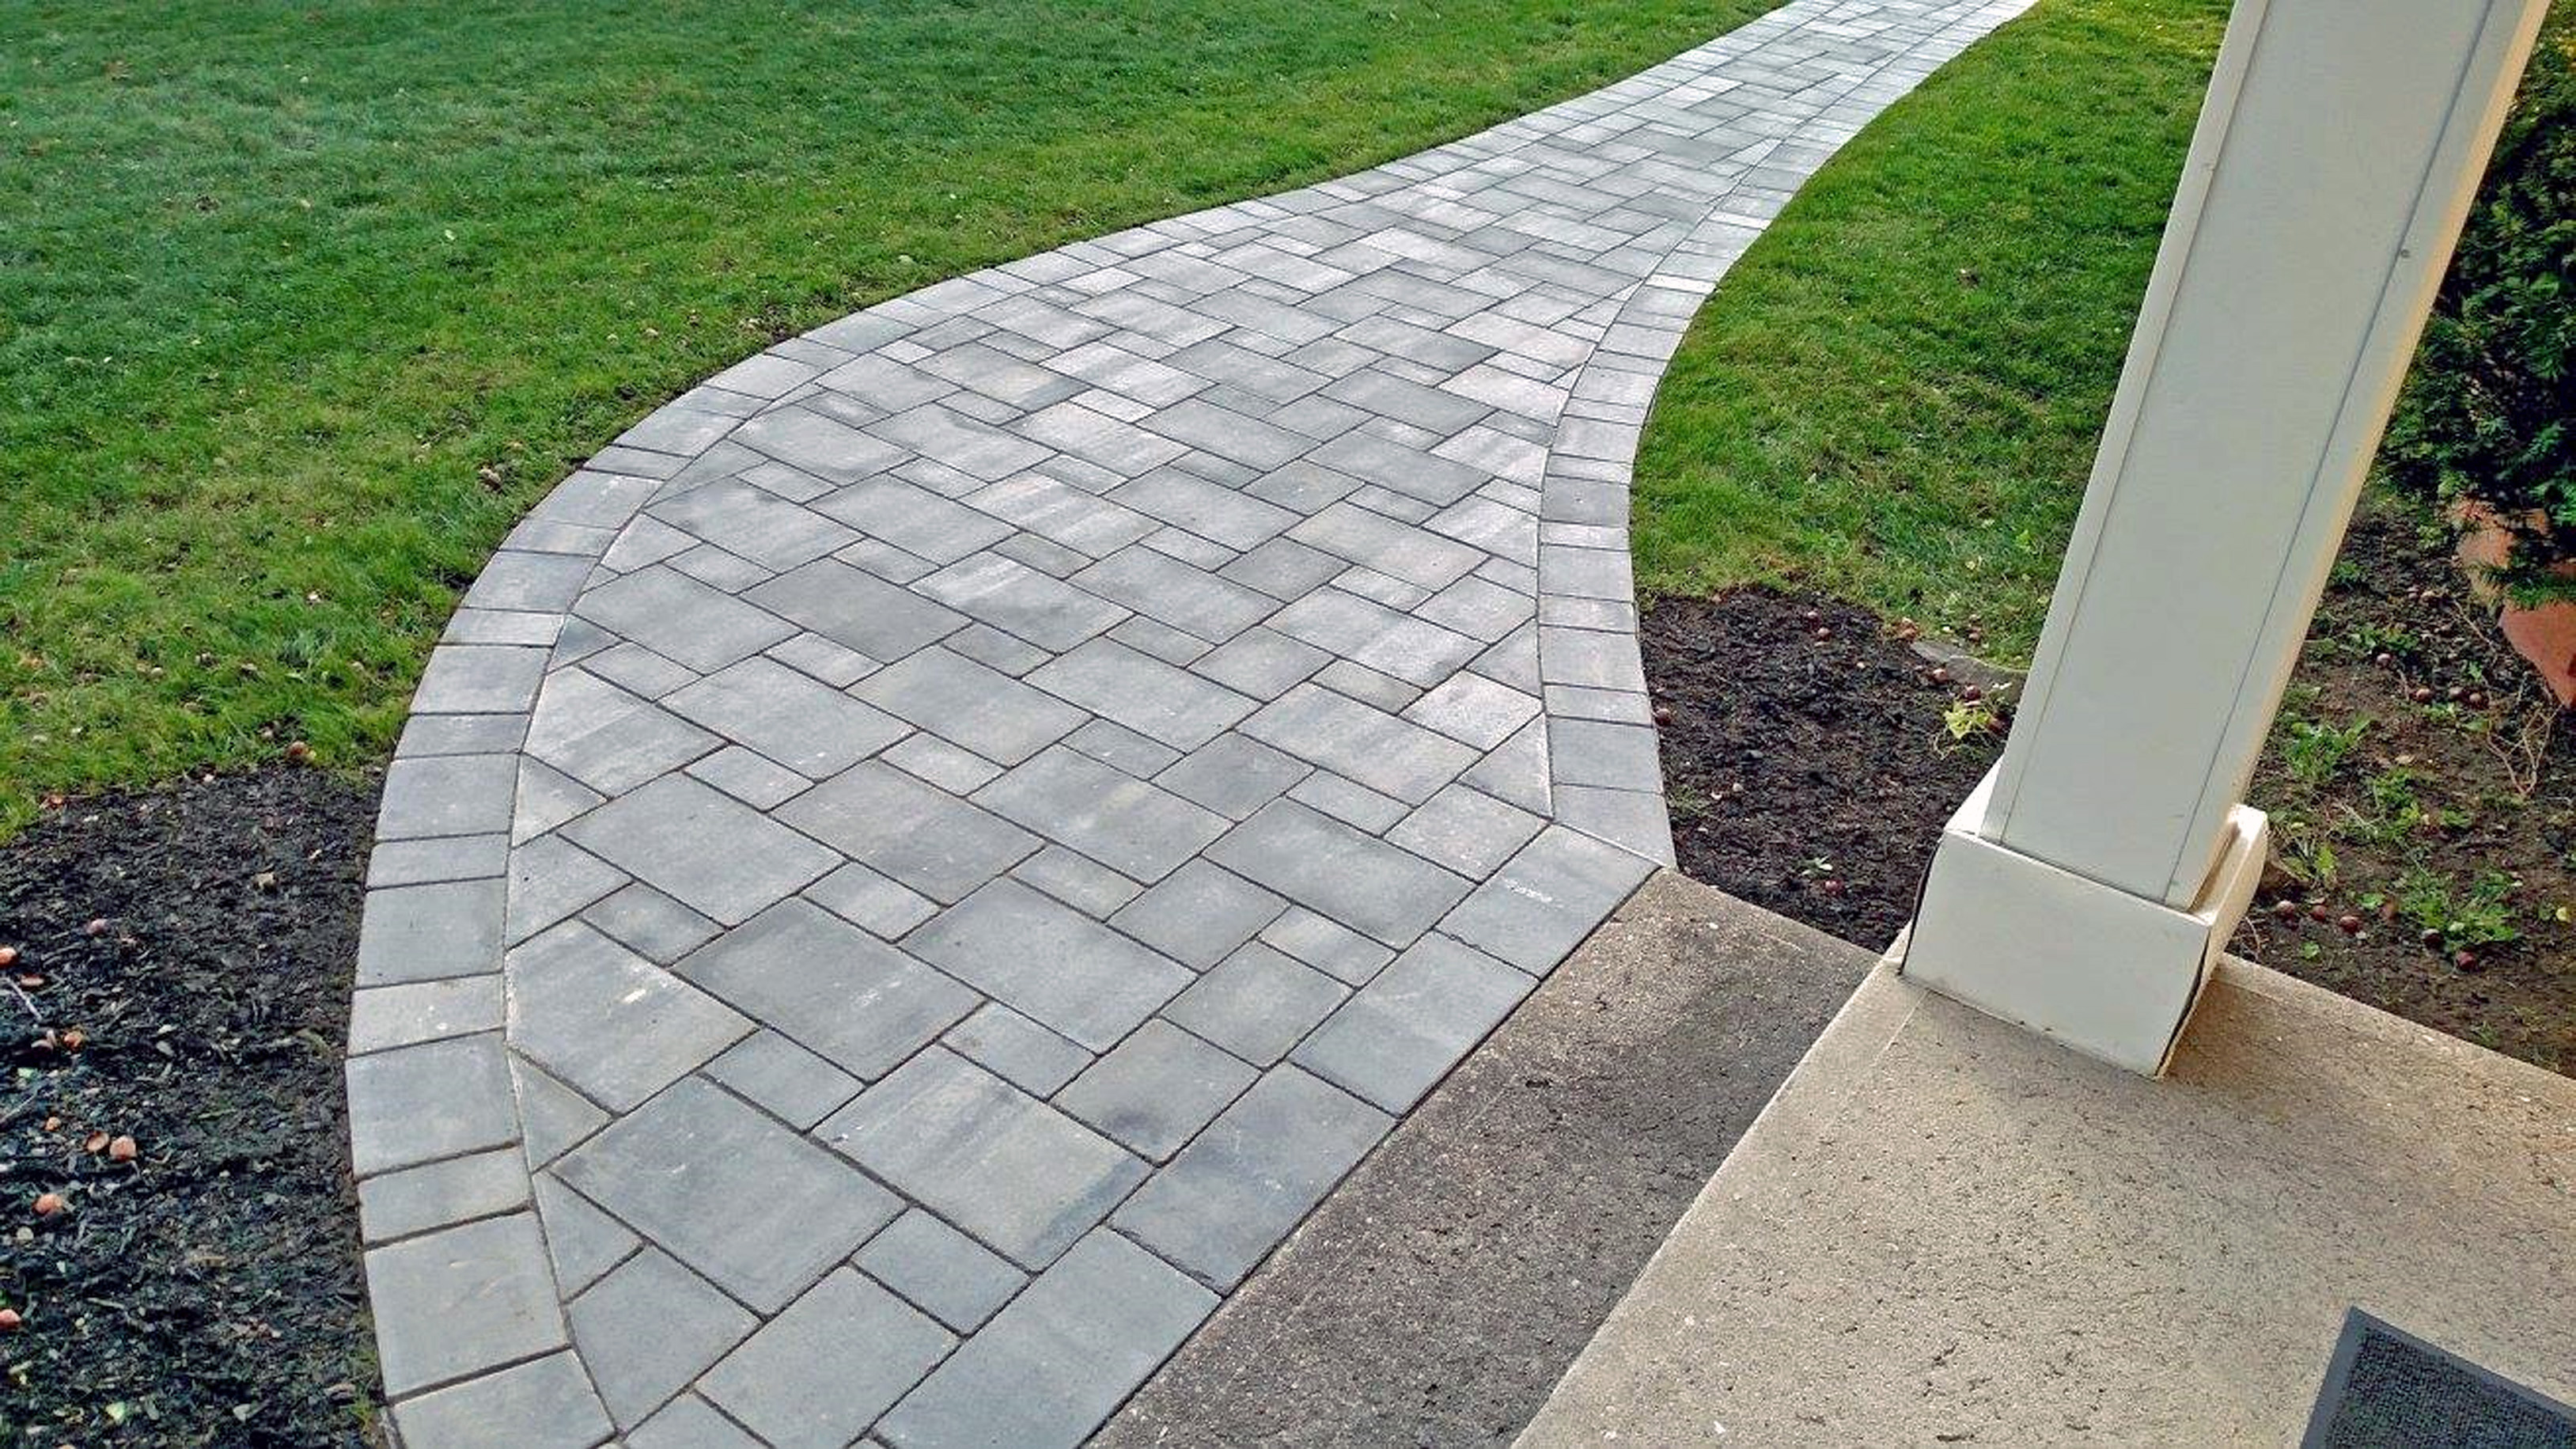 Thumbnail of completed sidewalk made of stone